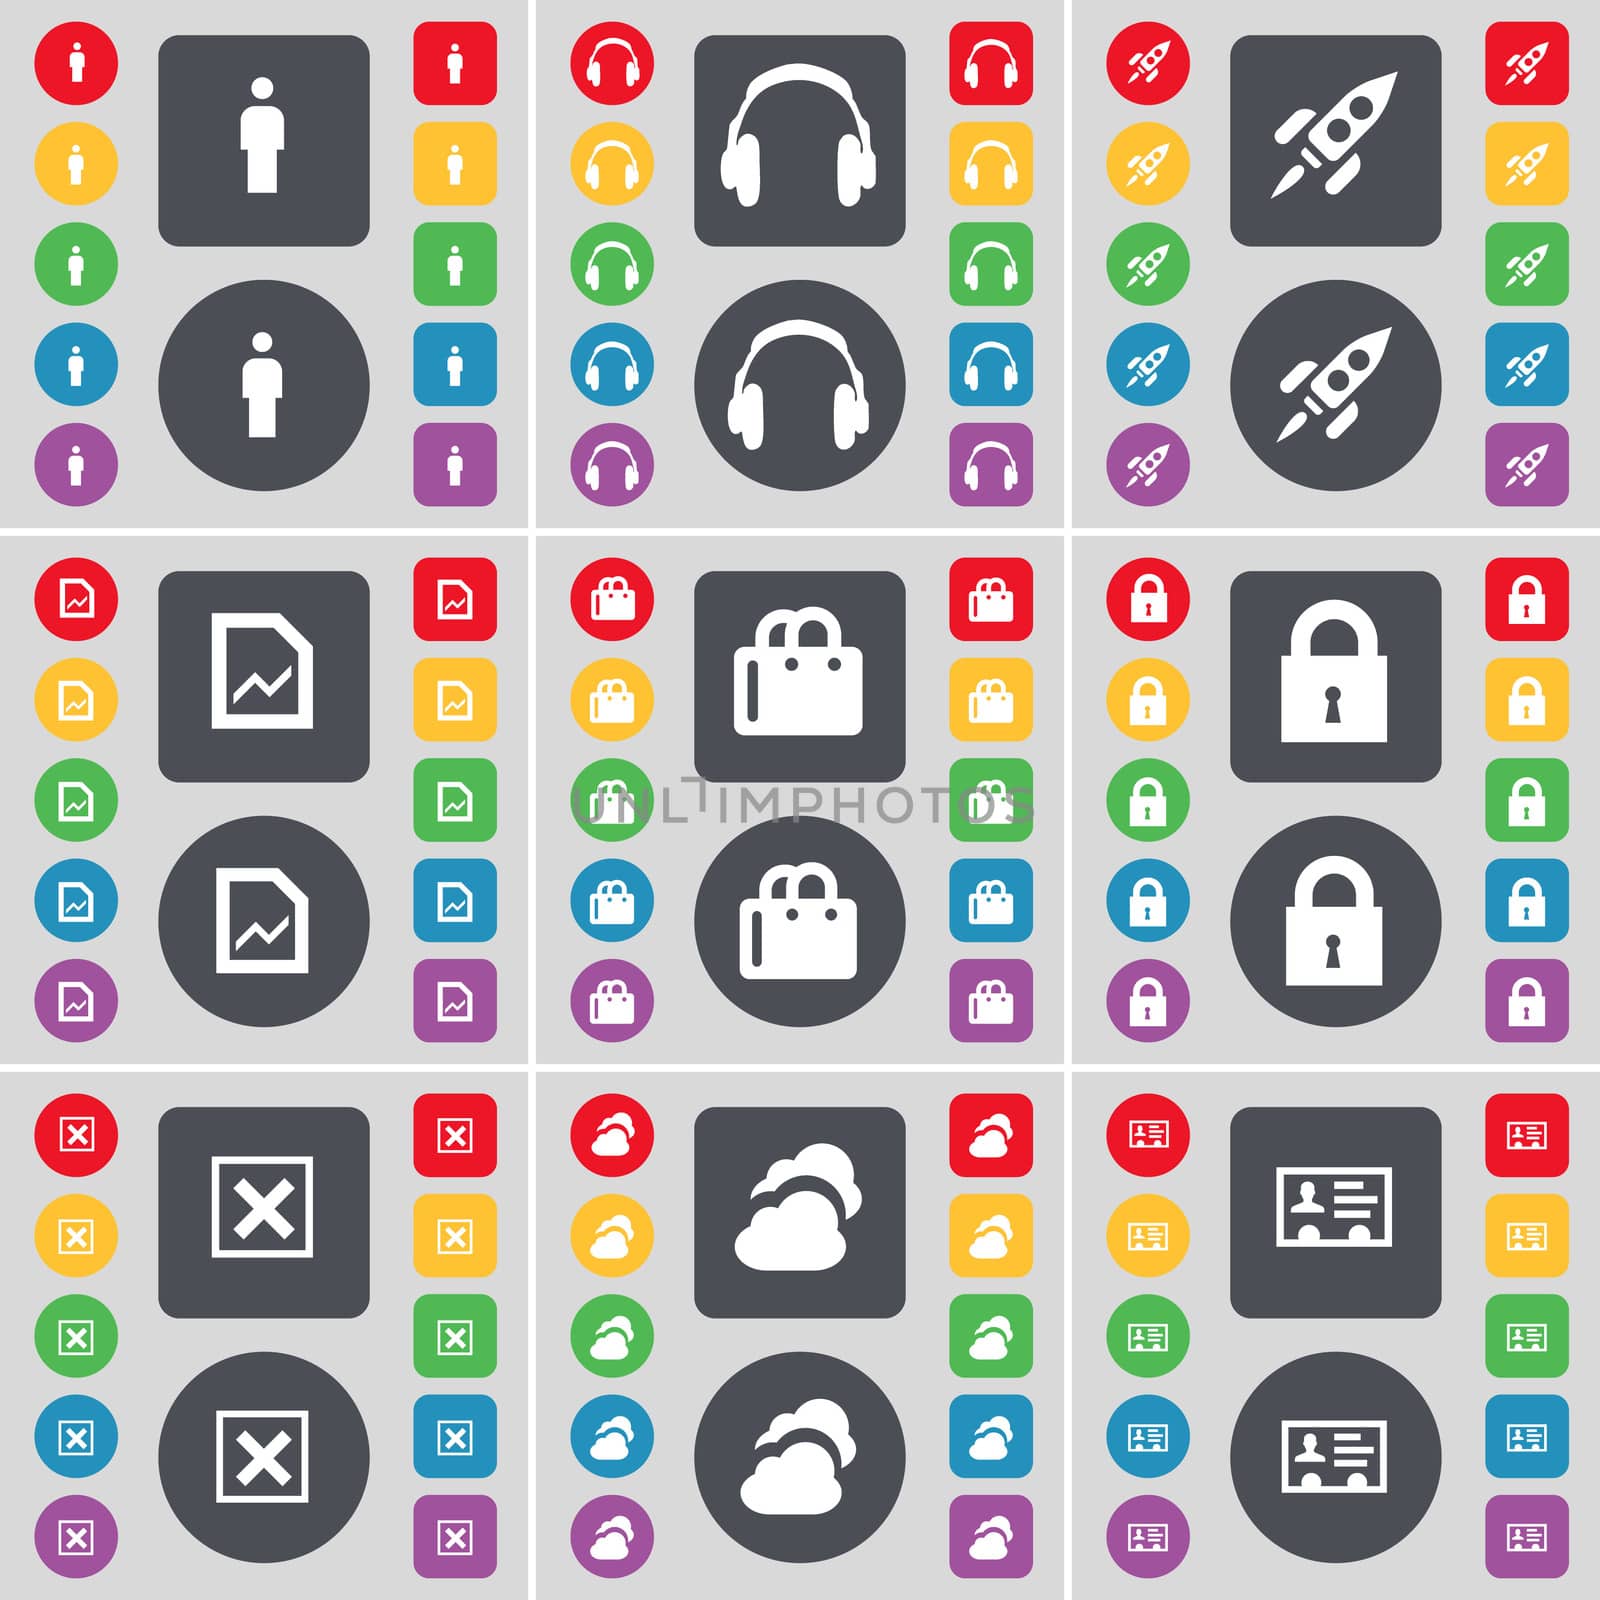 Silhouette, Headphones, Rocket, Graph, Shopping bag, Lock, Stop, Cloud, Contact icon symbol. A large set of flat, colored buttons for your design. illustration